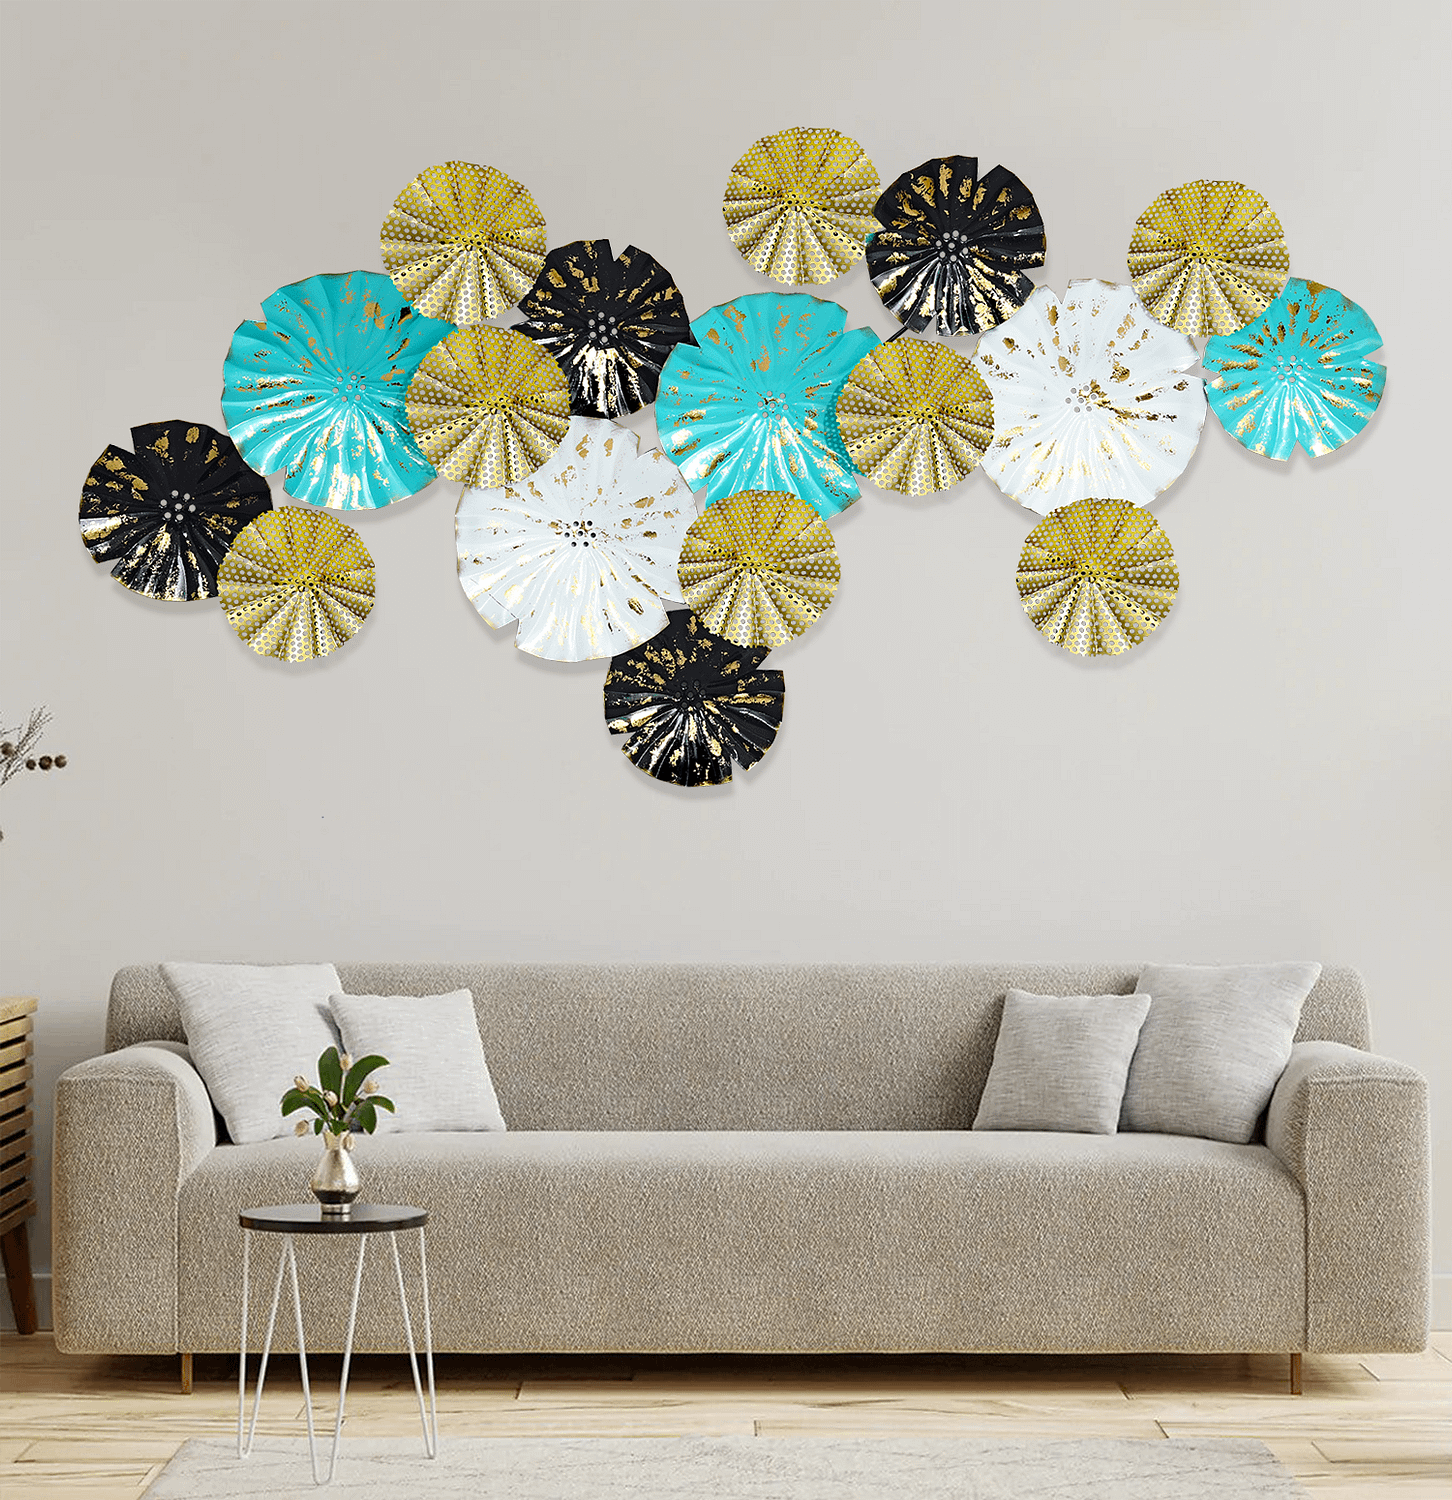 MultiColor Metal Dome Style Wall Art